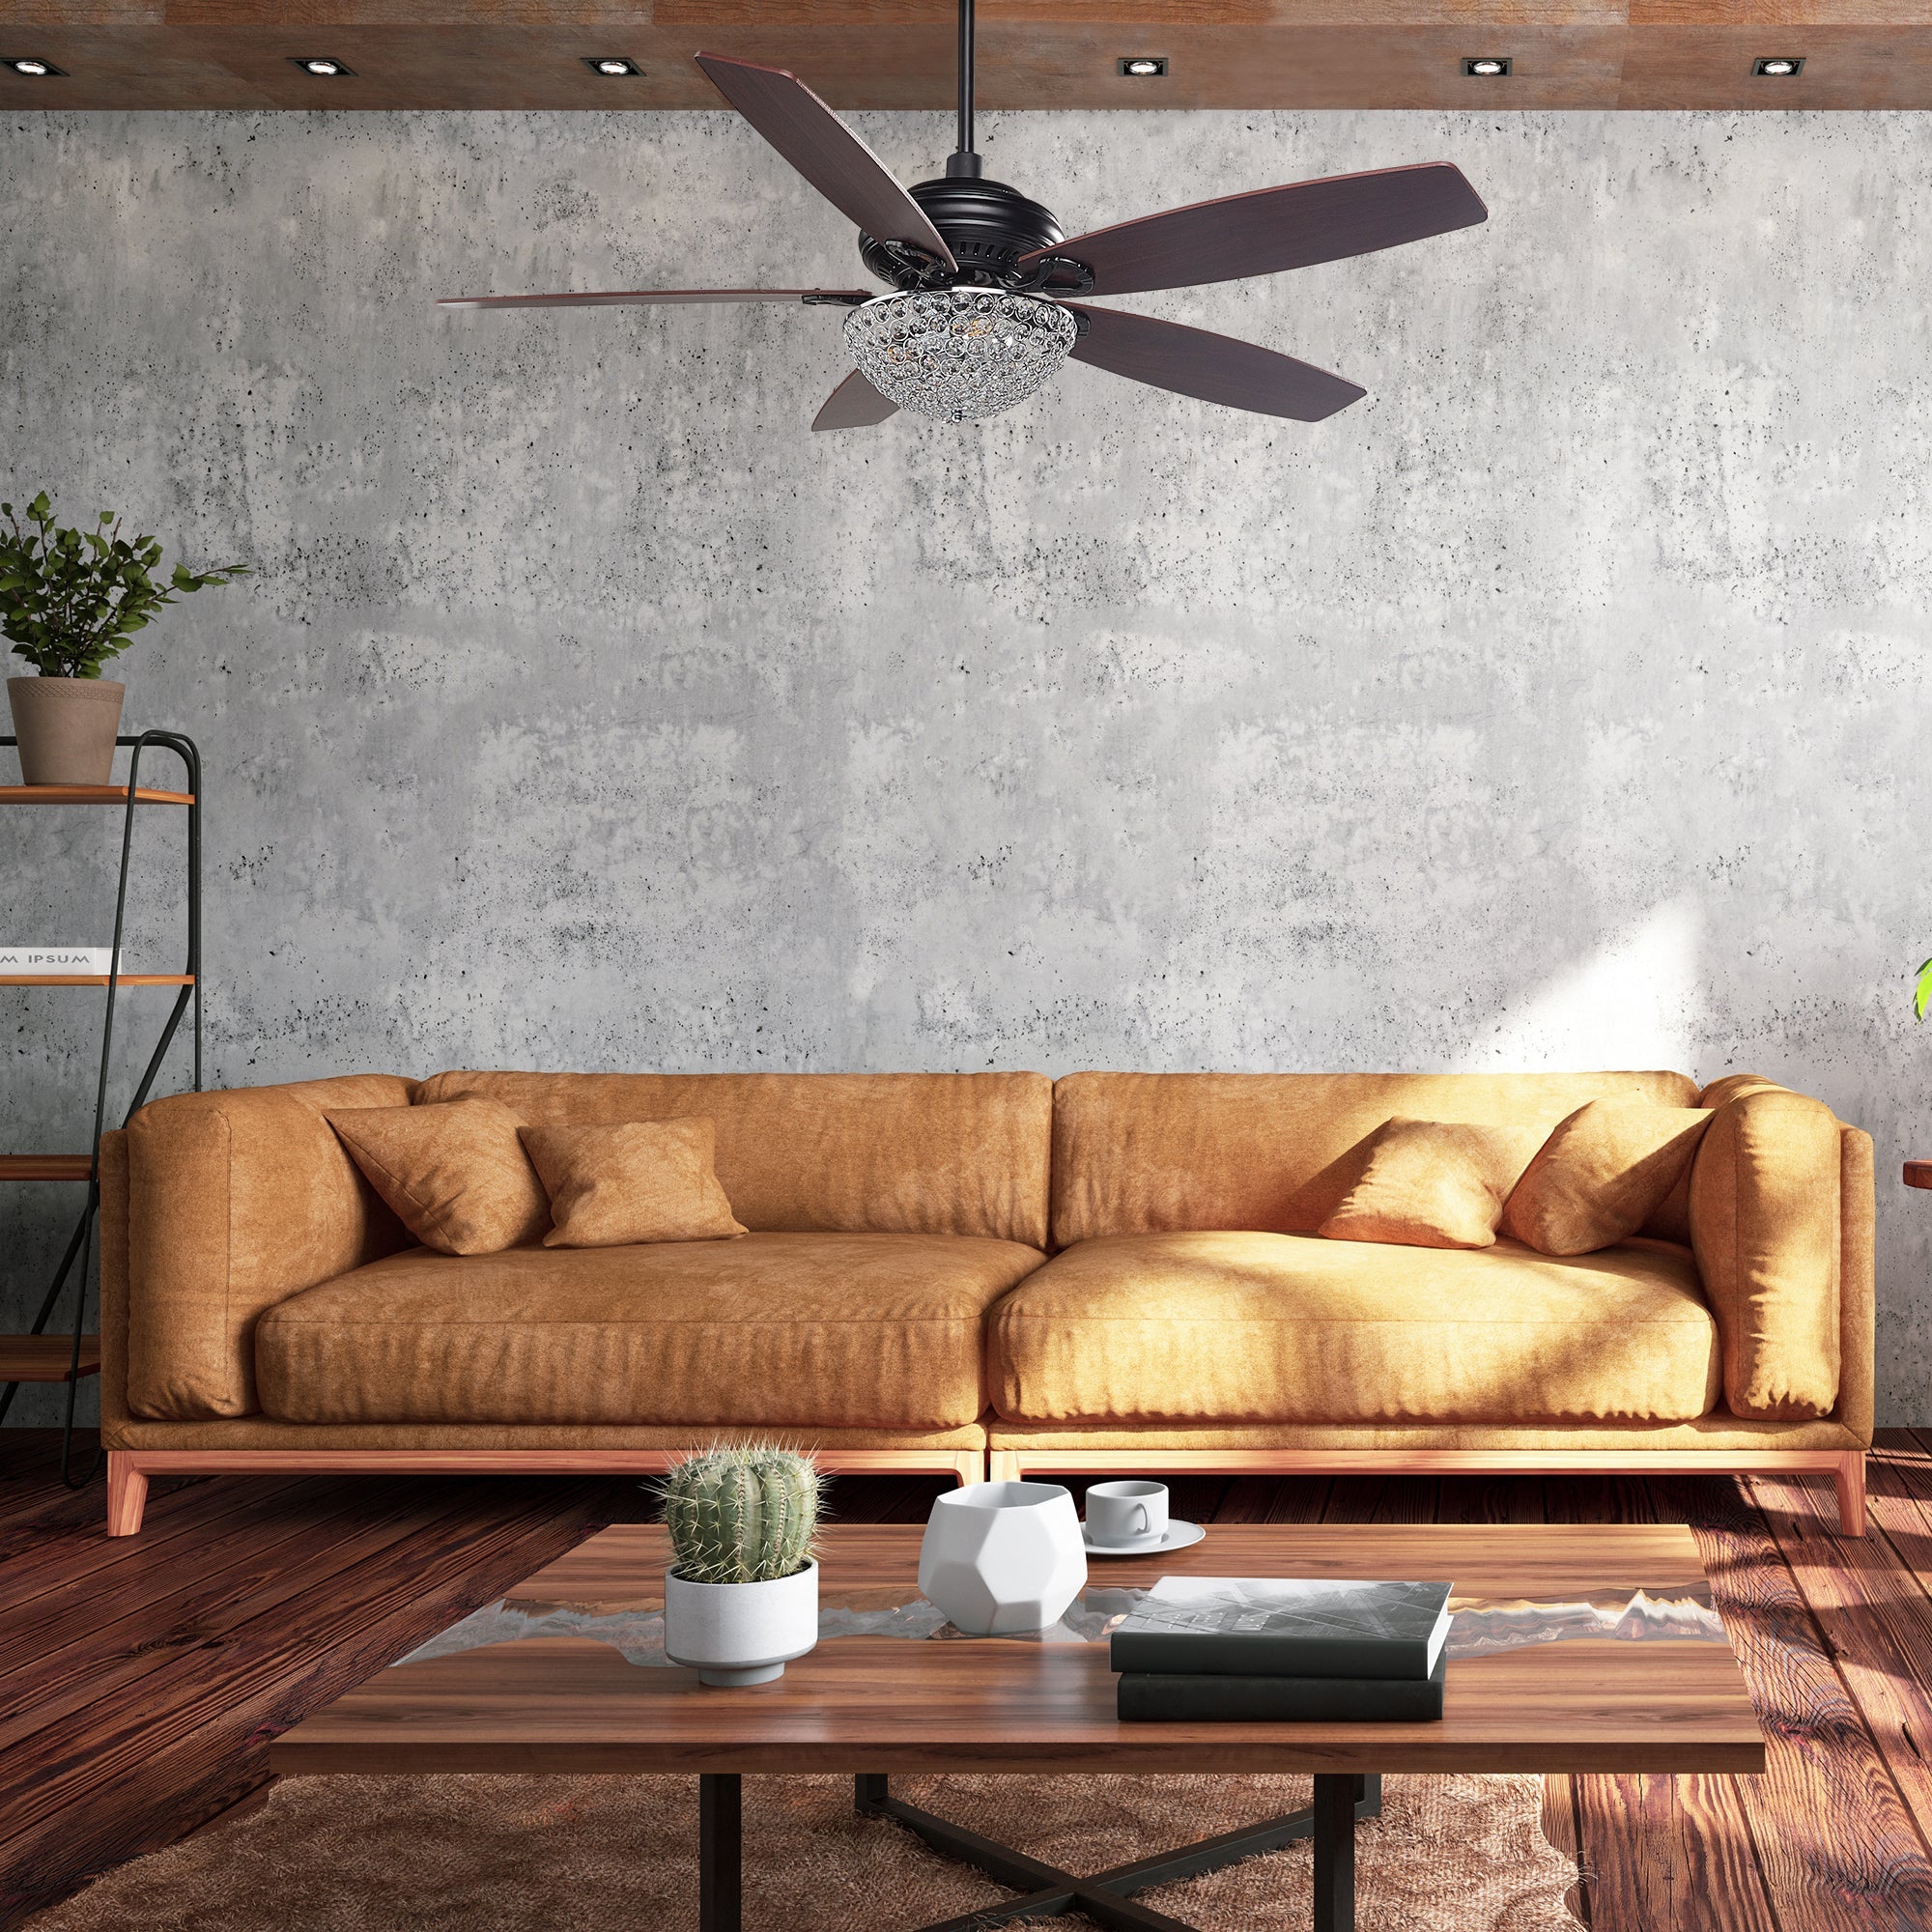 This Smafan Henderson 52''/56'' Crystal ceiling fan keeps your space cool, bright, and stylish. It is a soft modern masterpiece perfect for your large indoor living spaces. This ceiling fan is a simplicity designing with black finish, use elegant Plywood blades and compatible with LED bulb(Not included). The fan features remote control.